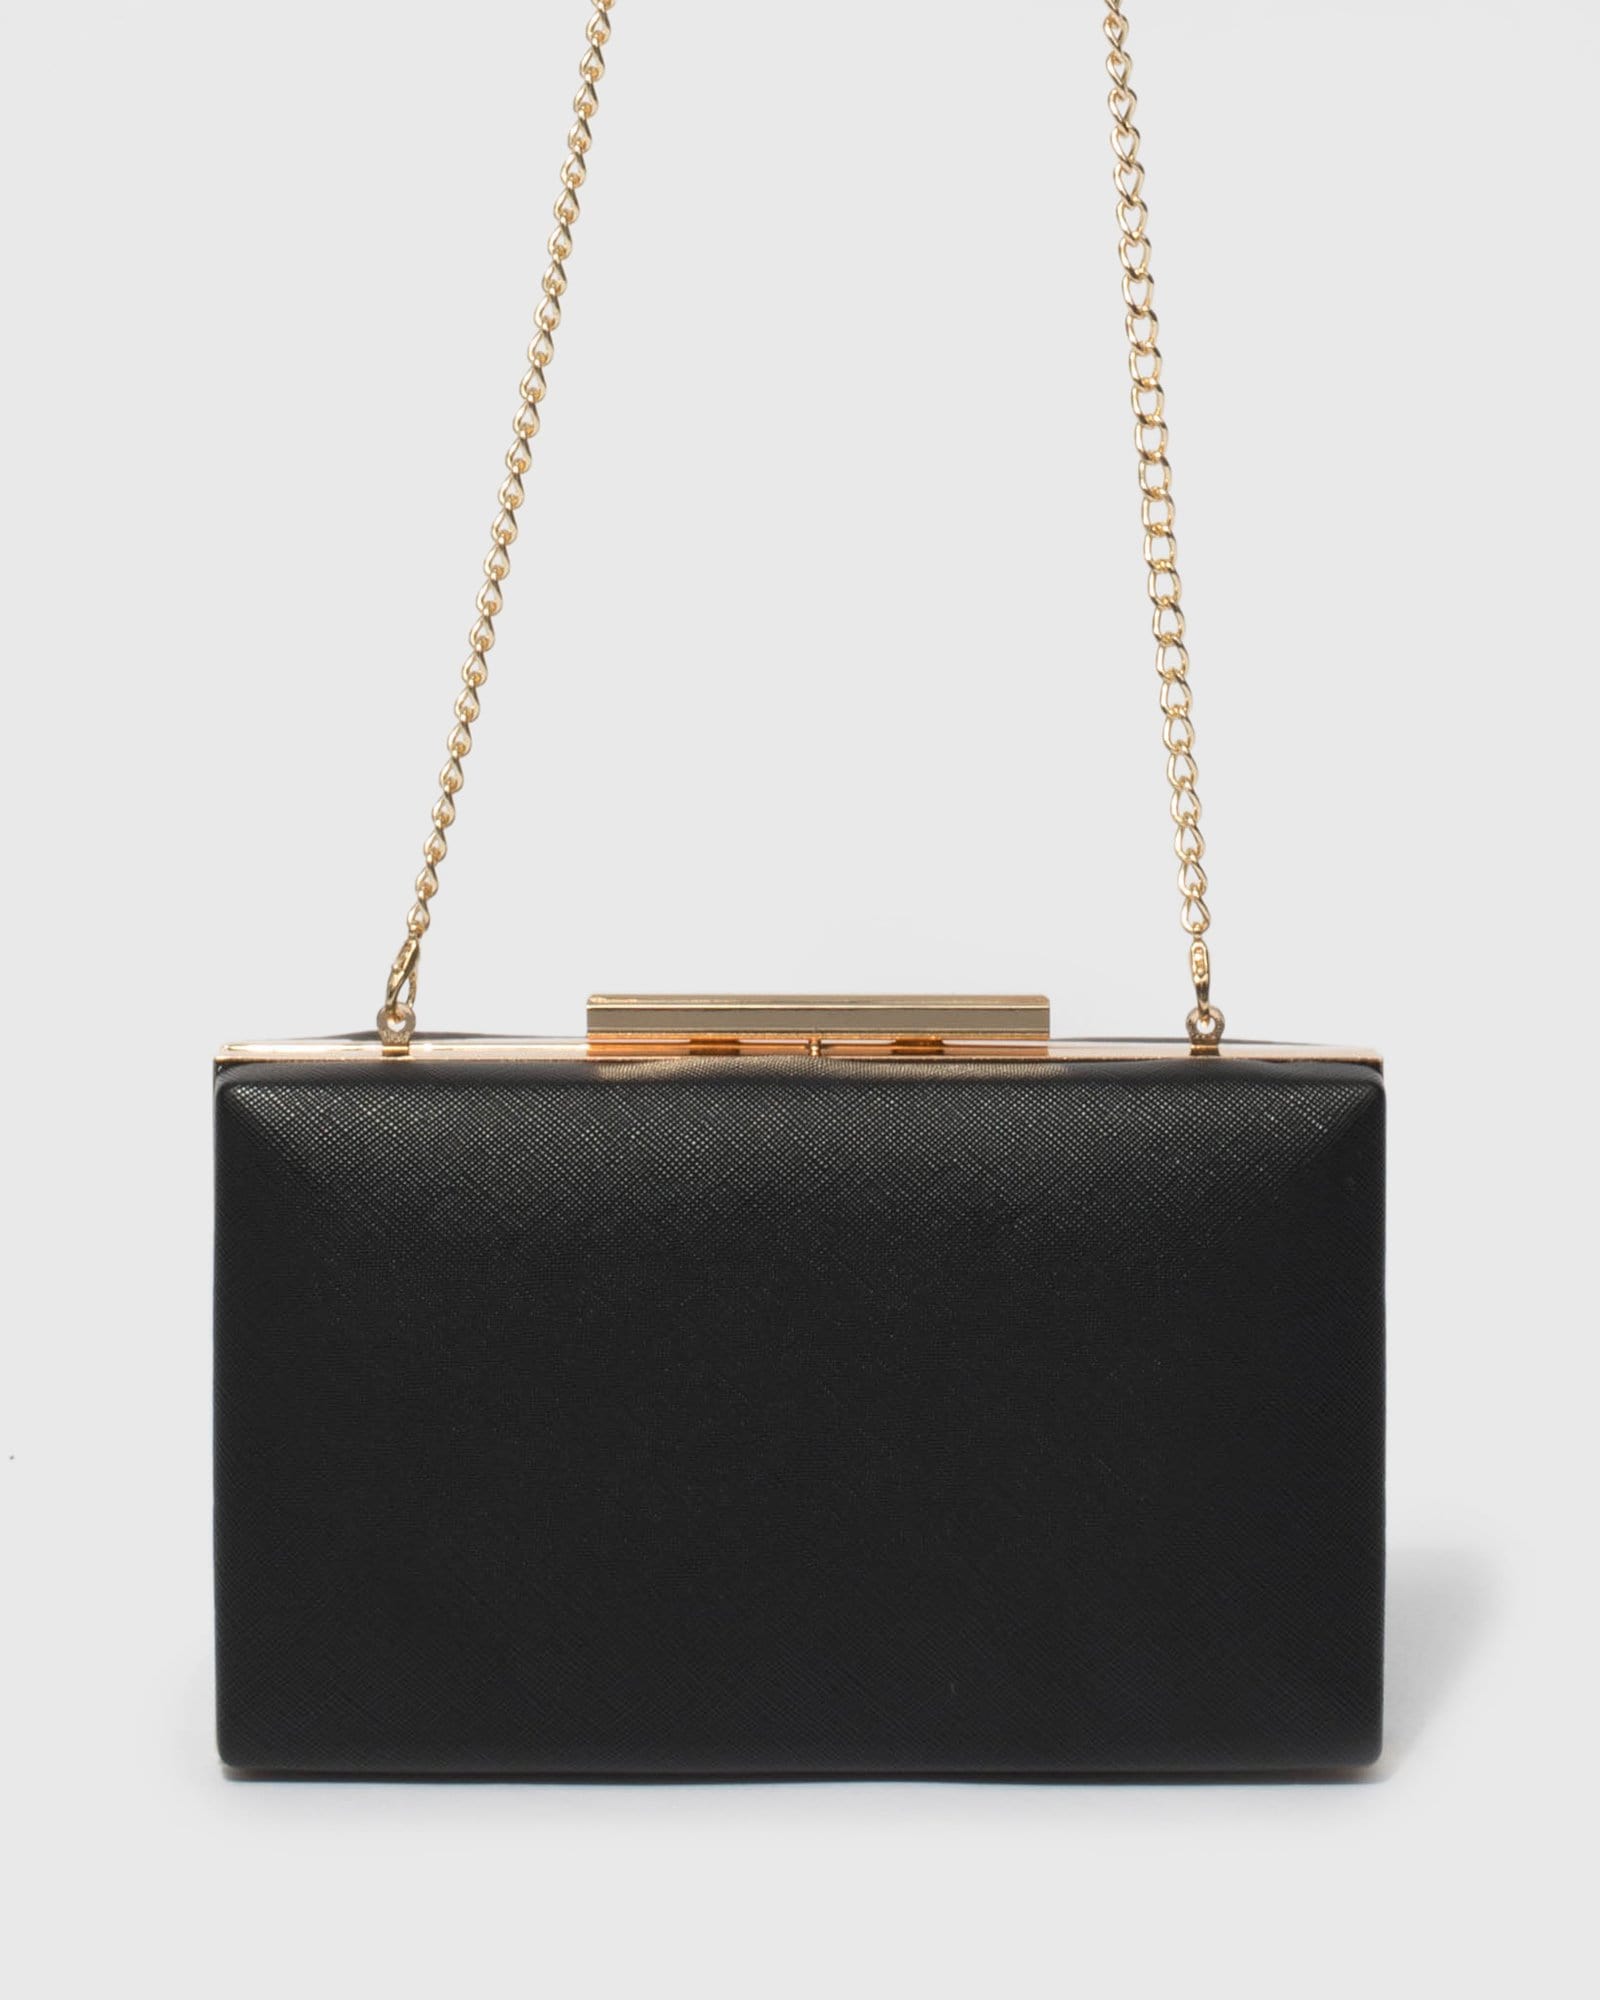 BTB Los Angeles Colette Clutch in Black | REVOLVE